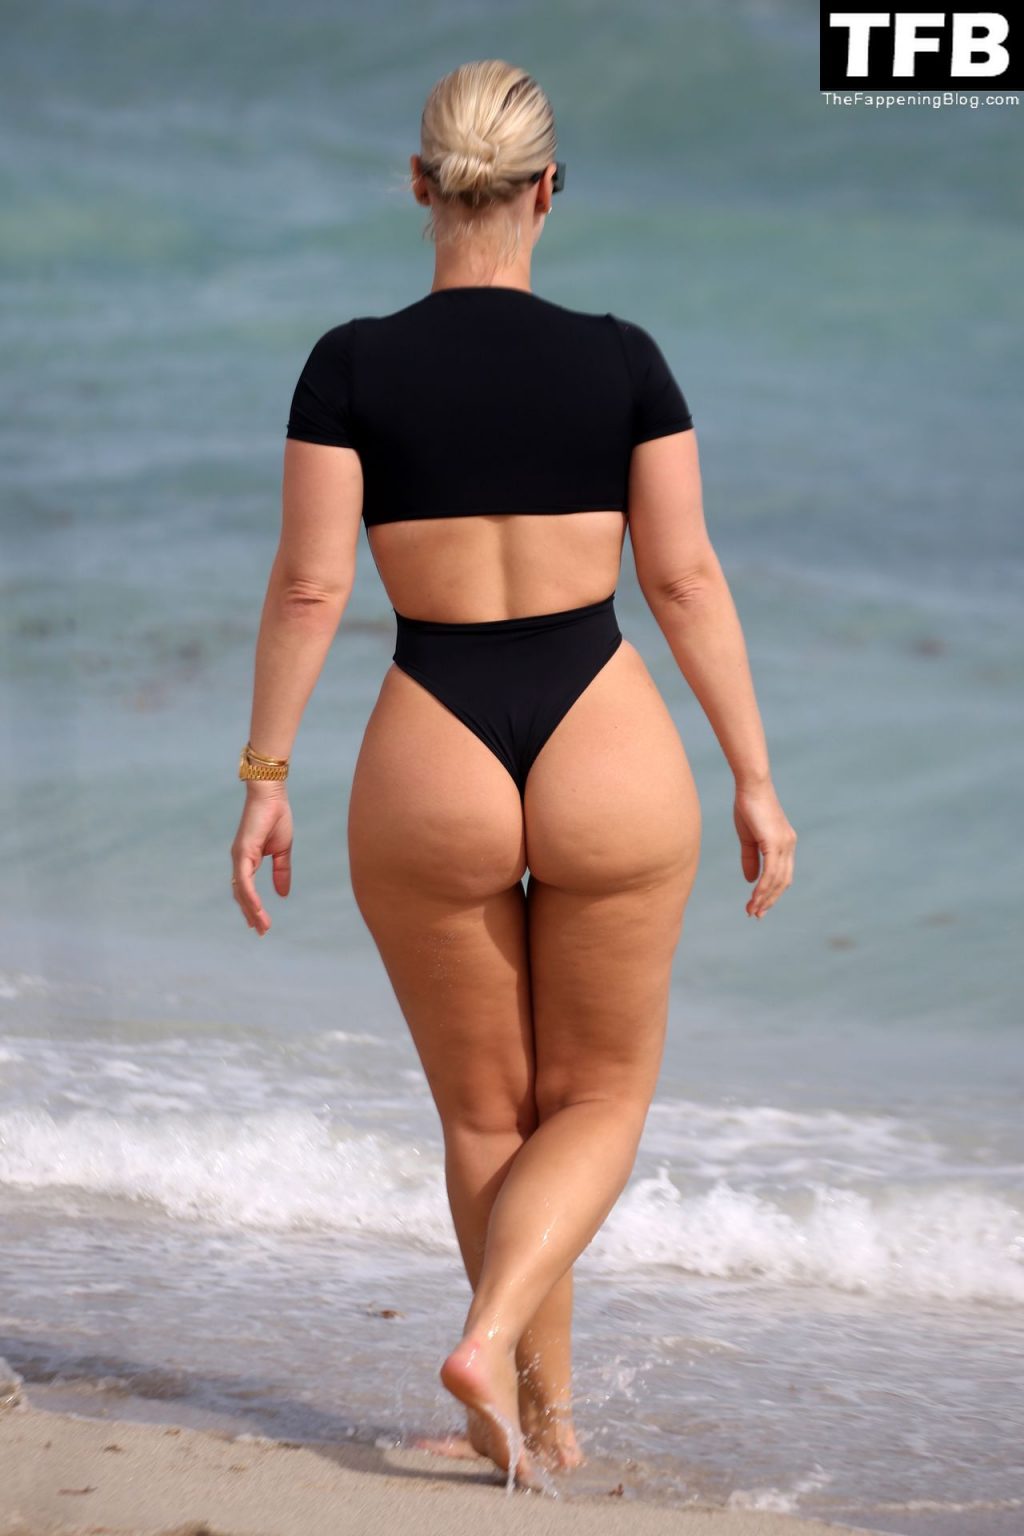 Bianca Elouise Shows Off Her Curves on the Beach in Miami (37 Photos)